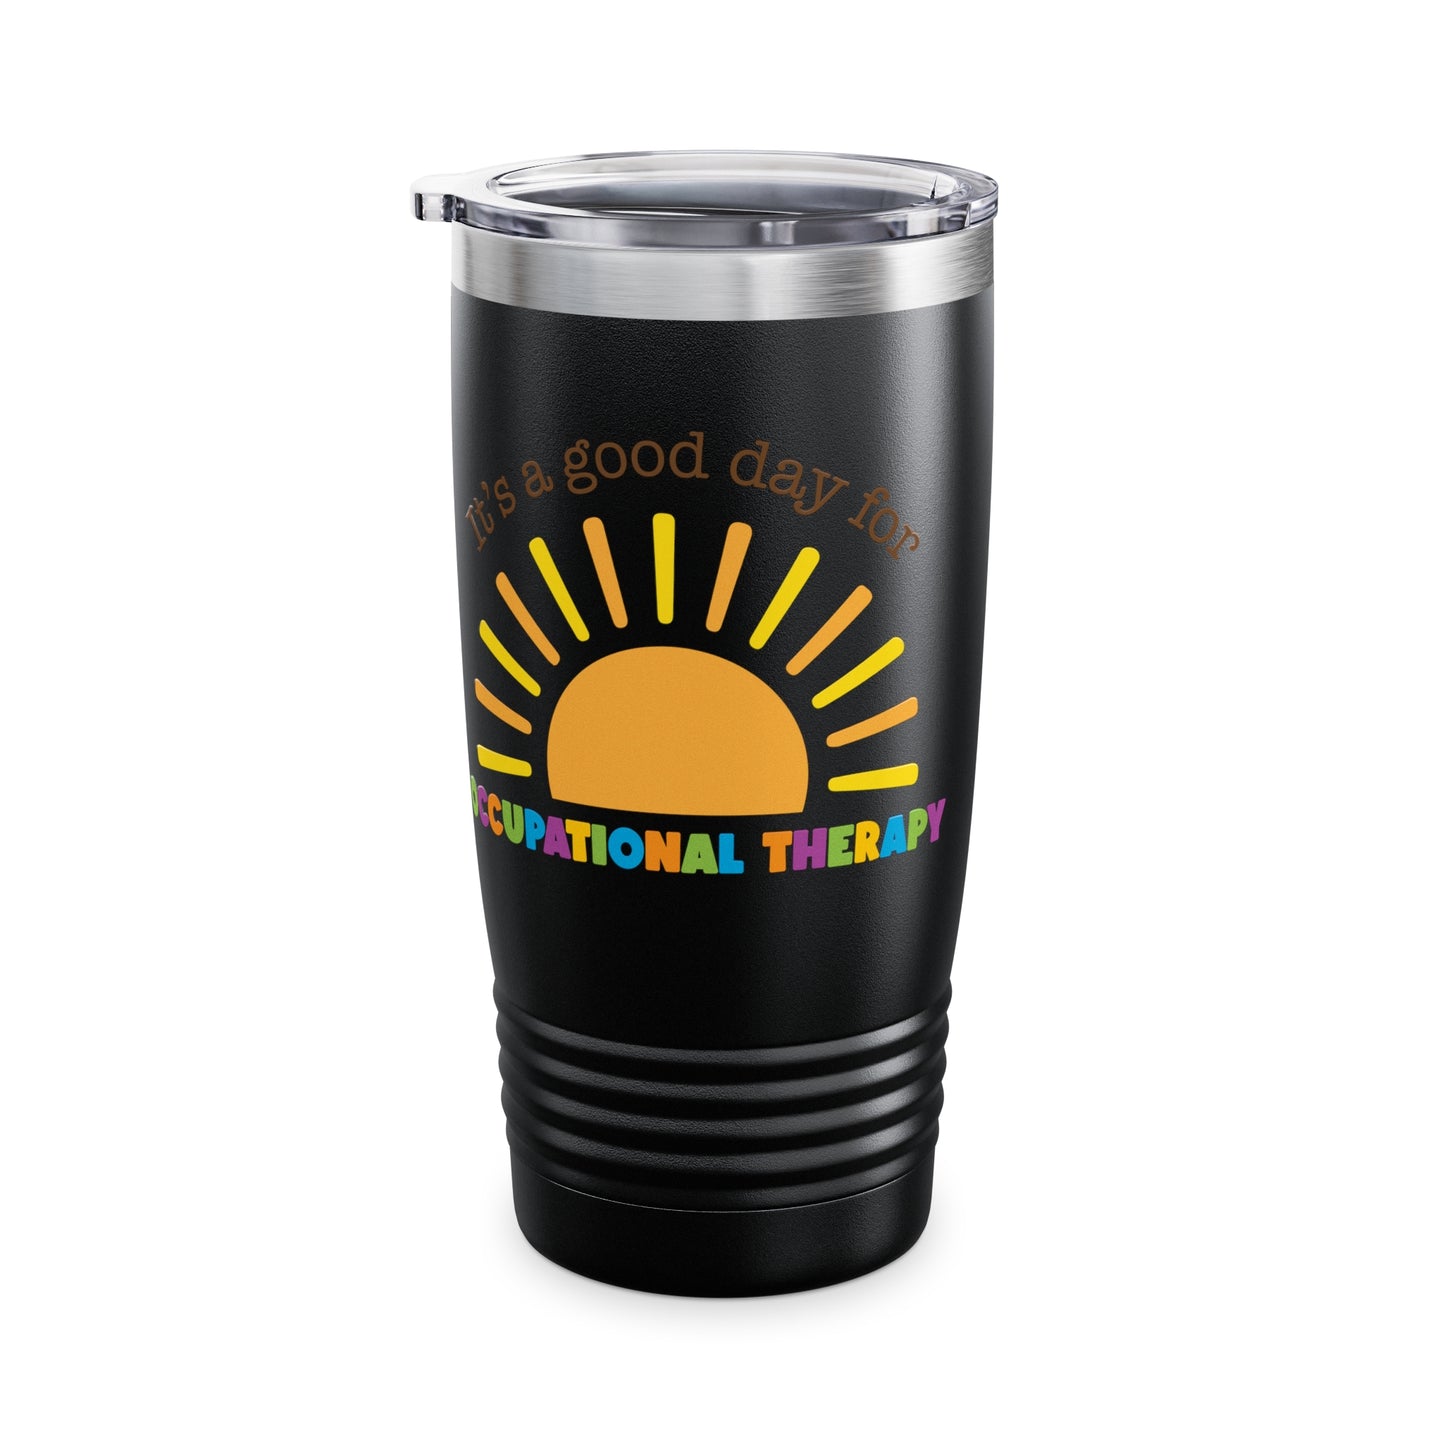 It's A Good Day For Occupational Therapy Tumbler, OT Tumbler, Therapist Tumbler